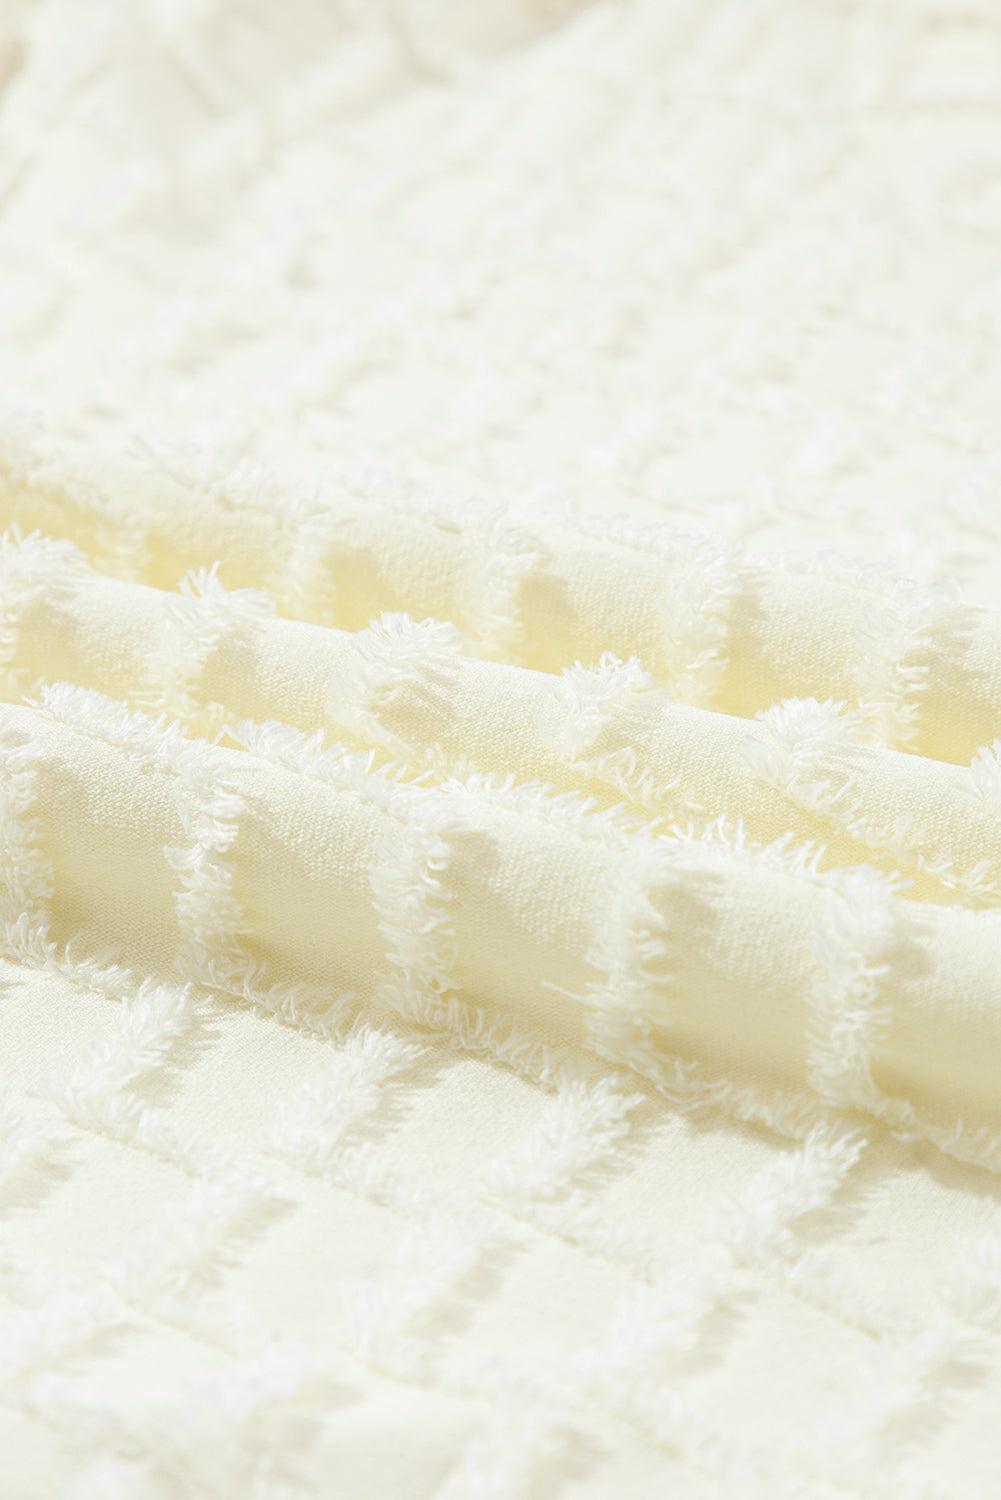 a close up of a white quilted material